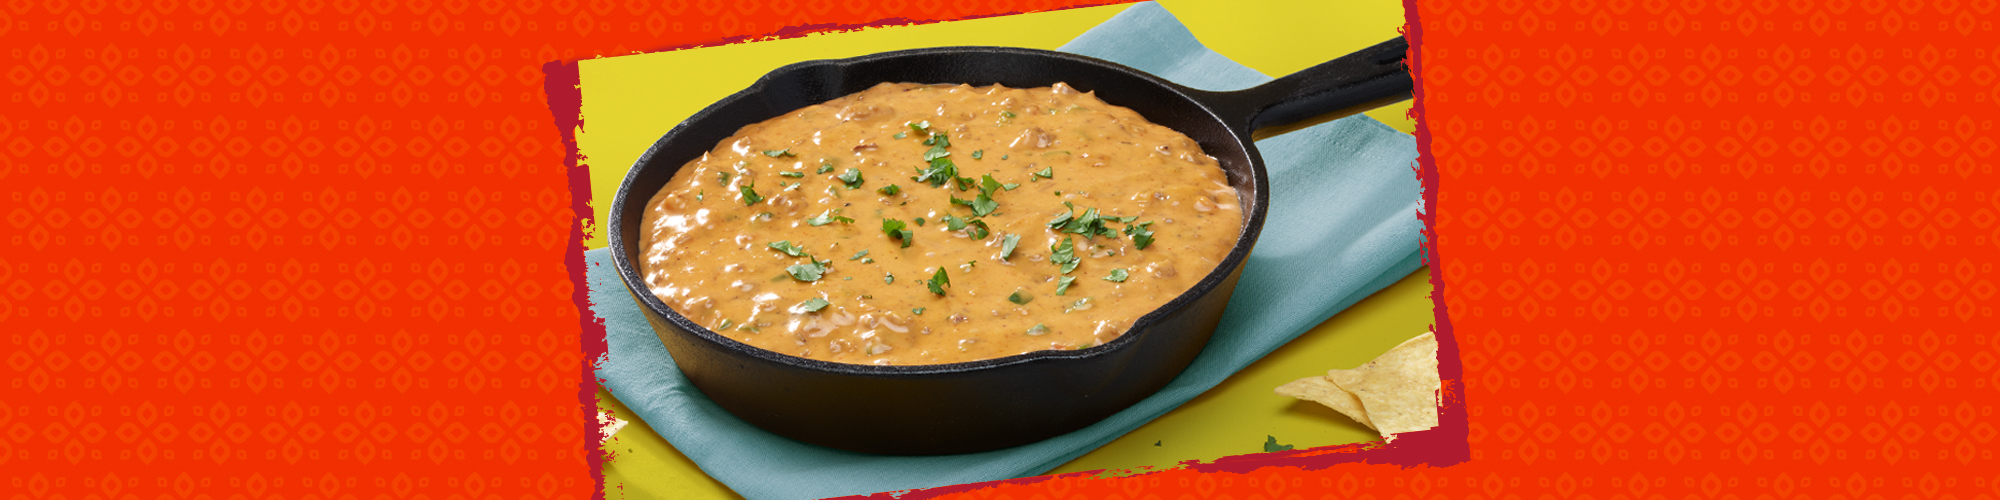 Salsas grilled queso with salsa